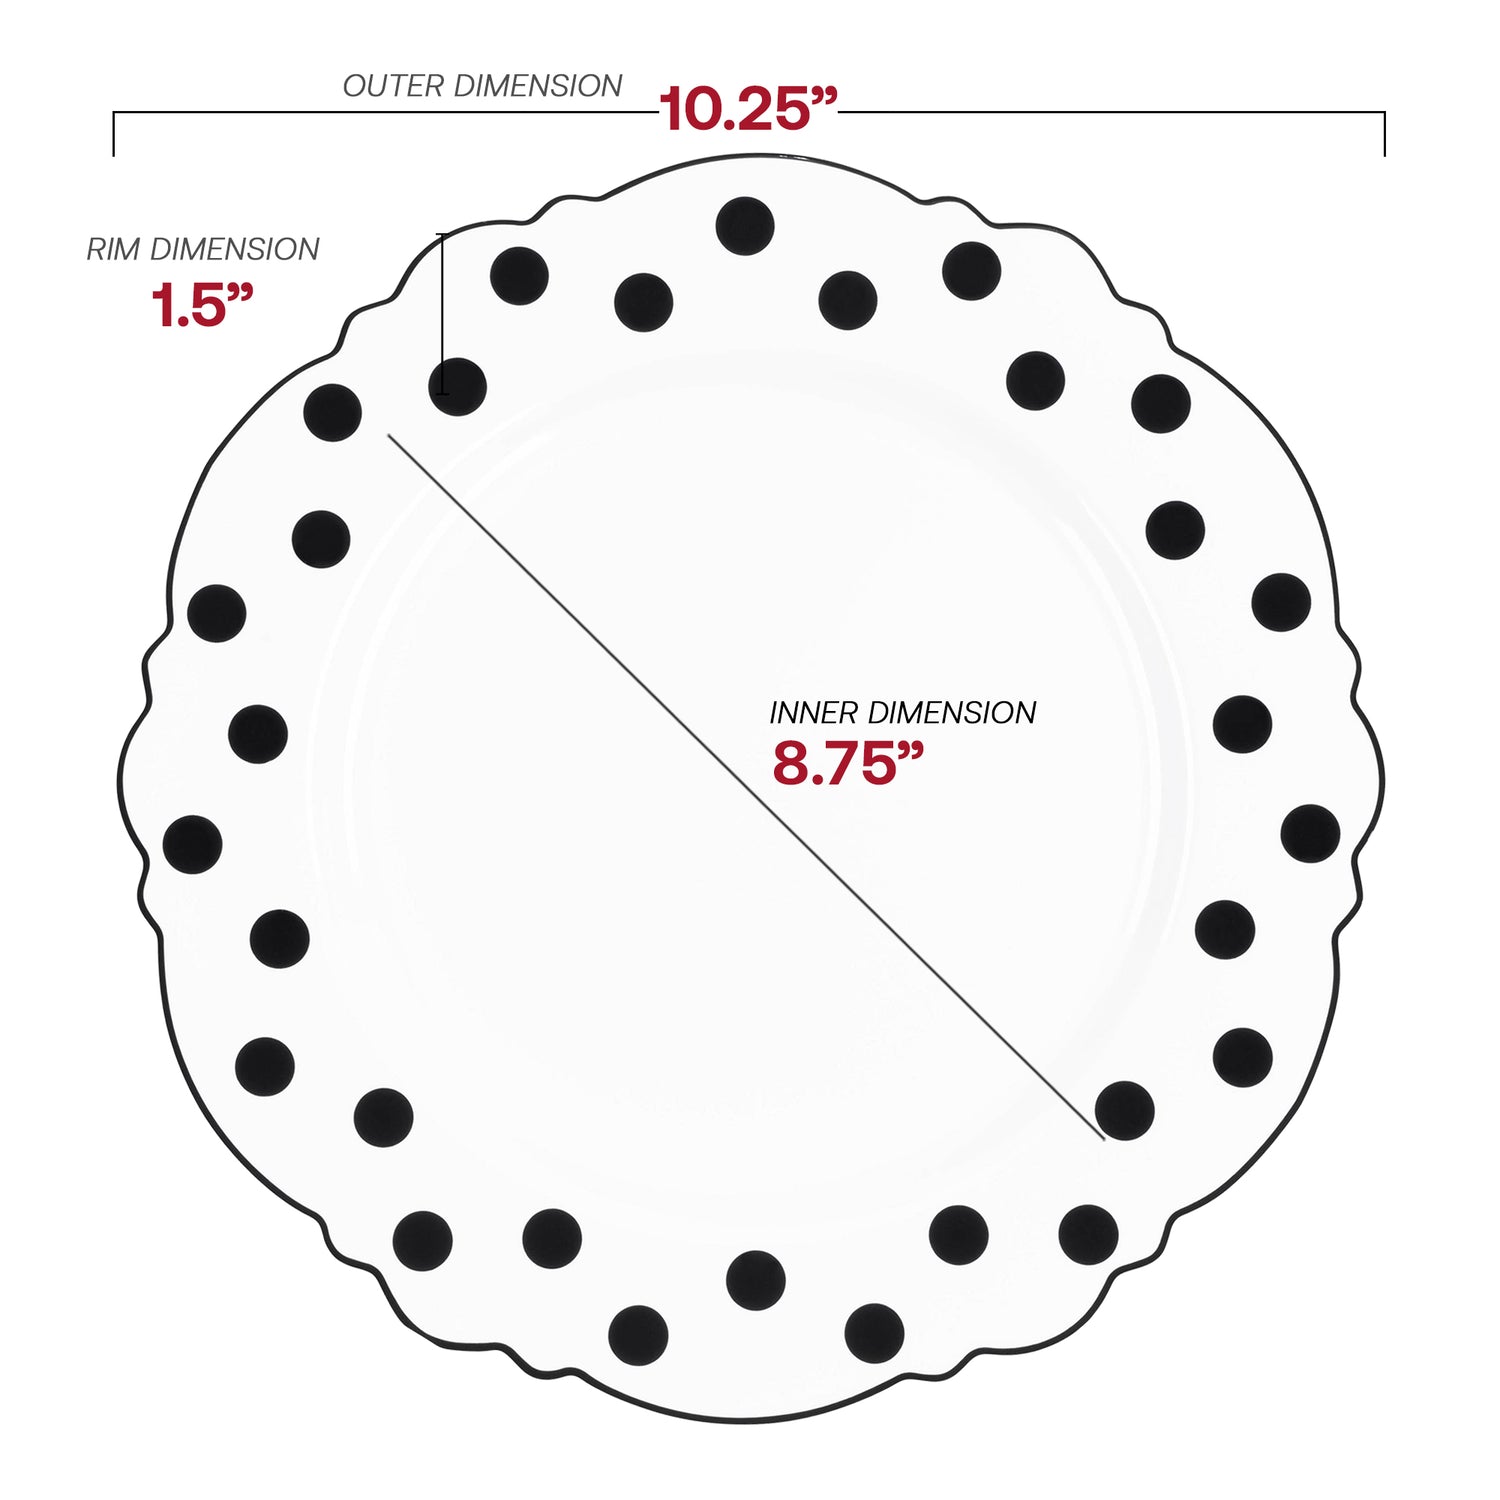 White with Black Dots Round Blossom Disposable Plastic Dinner Plates (10.25") Dimension | The Kaya Collection